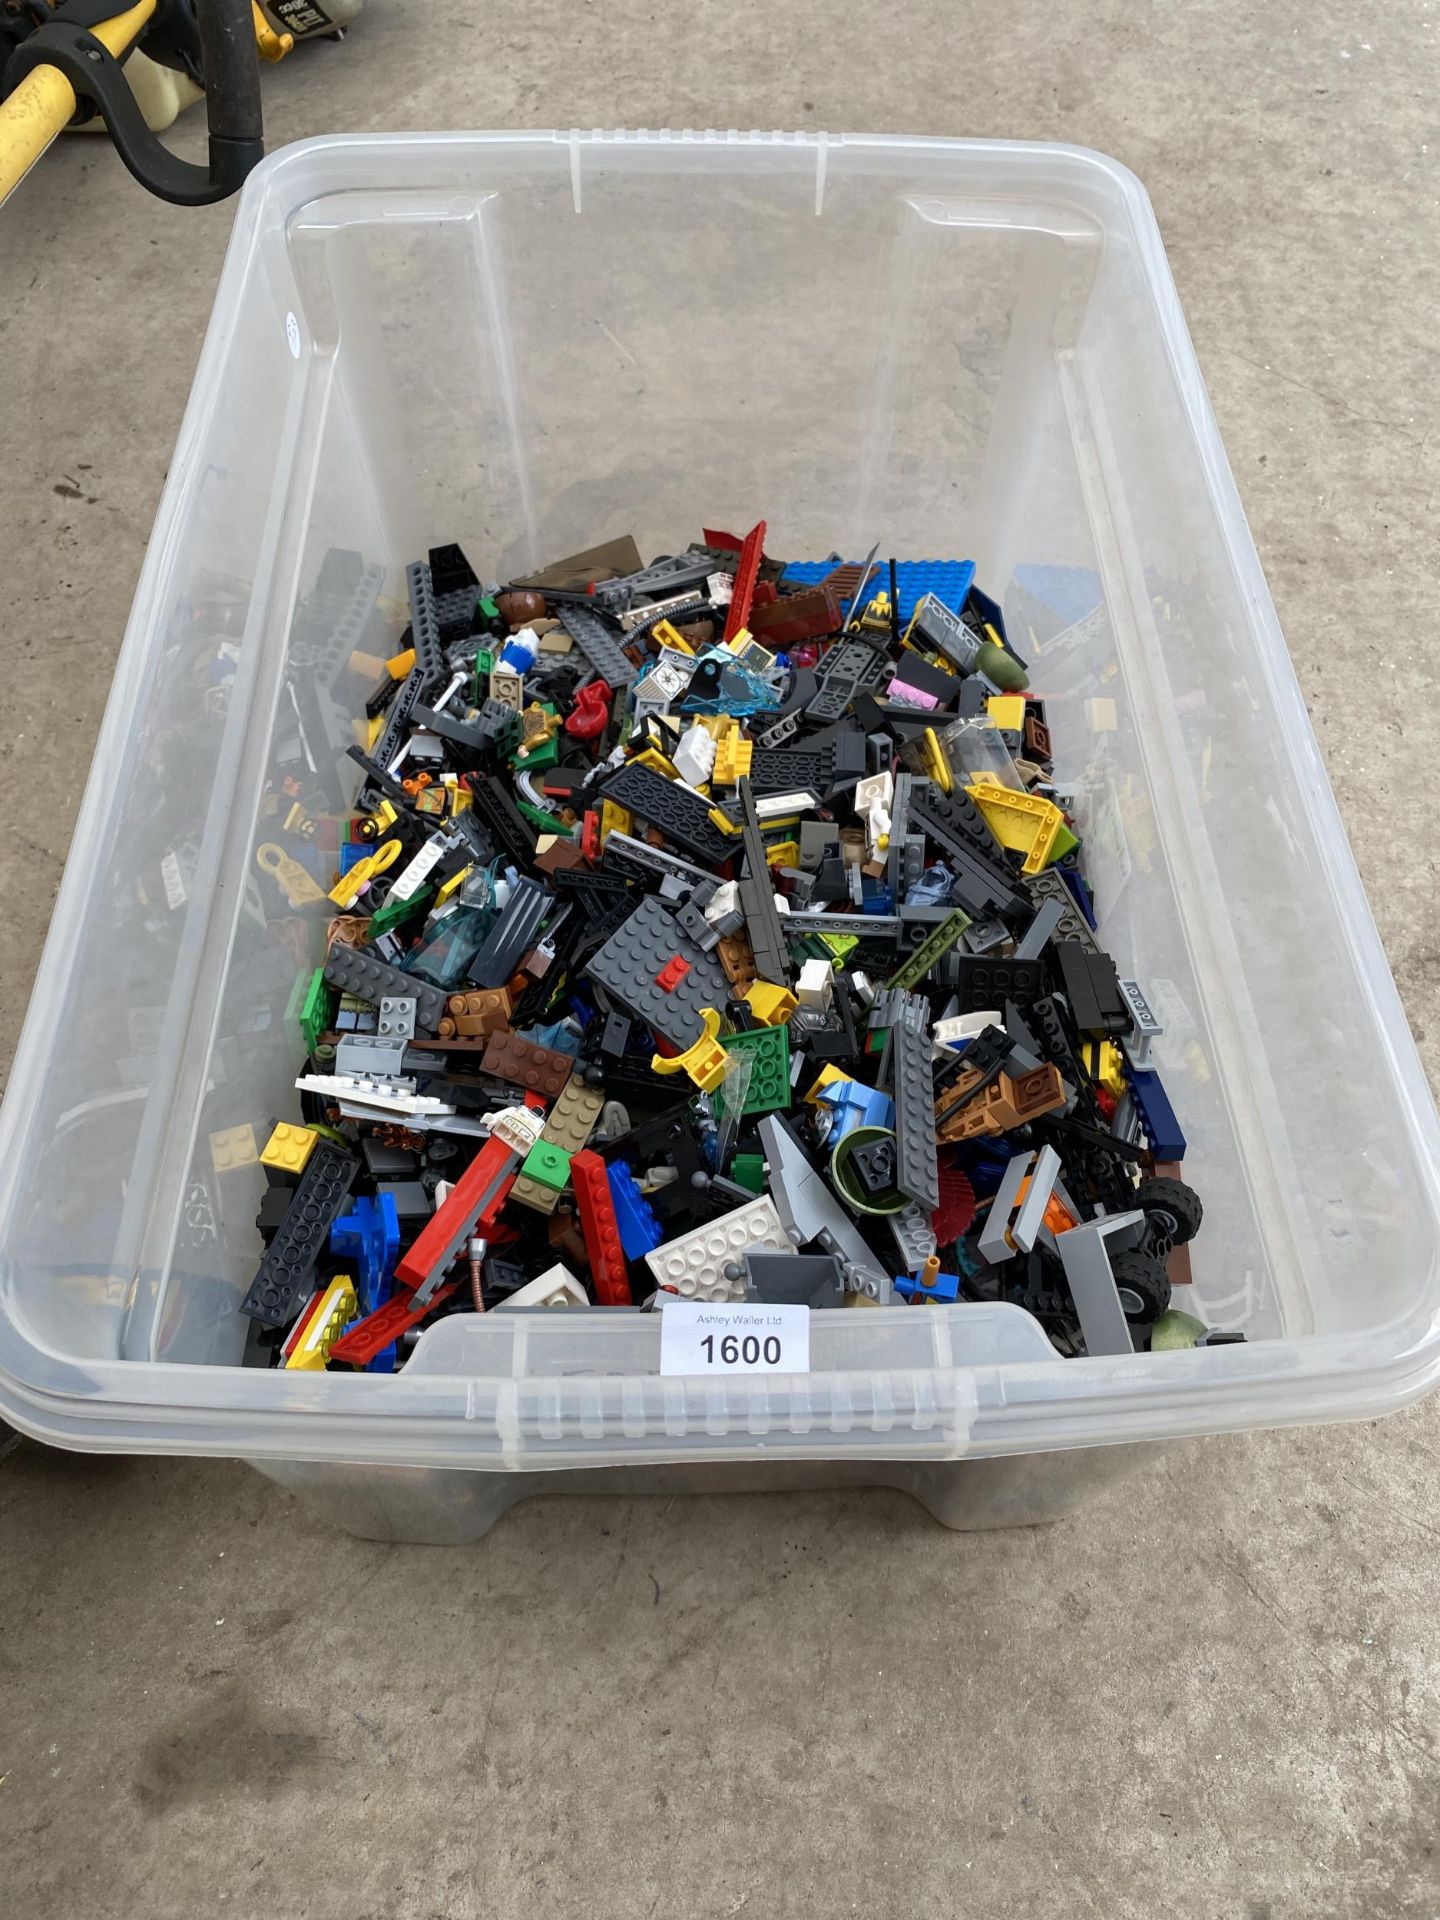 A LARGE ASSORTMENT OF LEGO